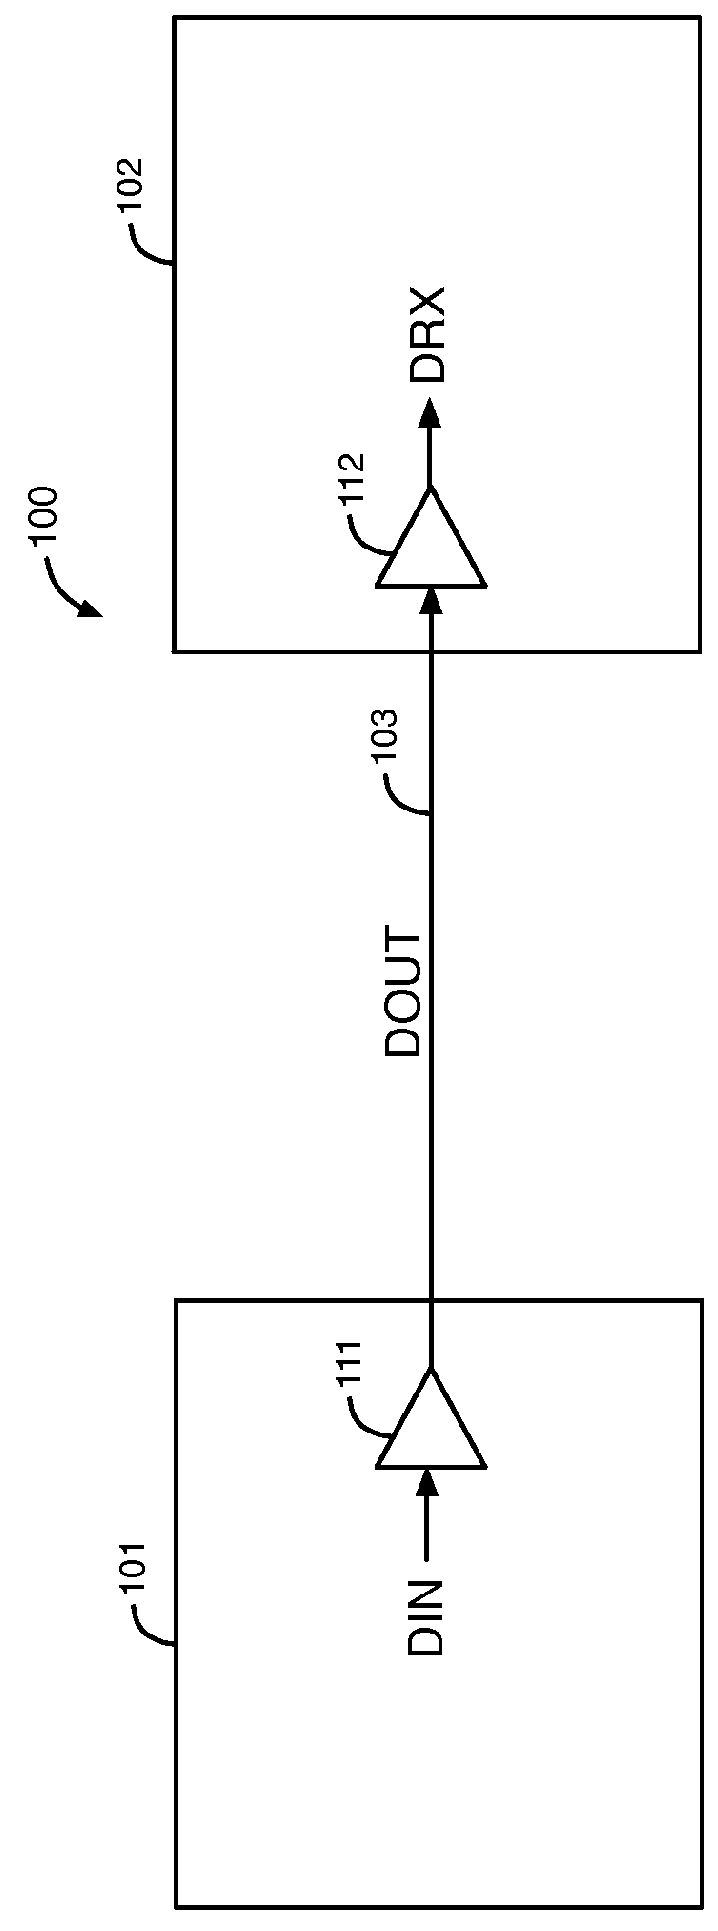 Circuits and methods for adjusting the voltage swing of a signal